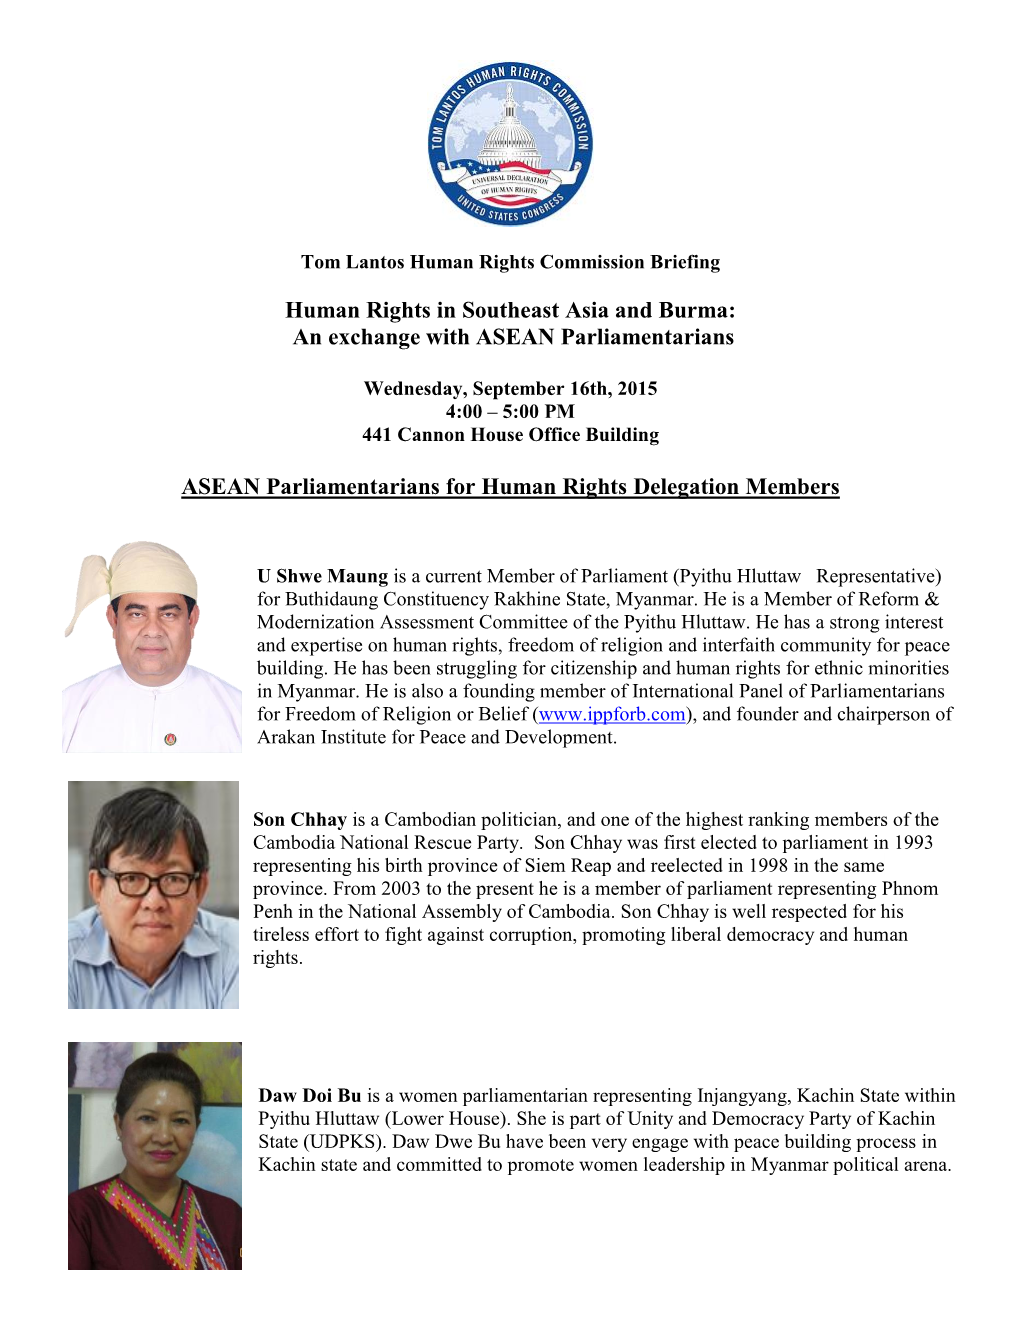 Human Rights in Southeast Asia and Burma: an Exchange with ASEAN Parliamentarians